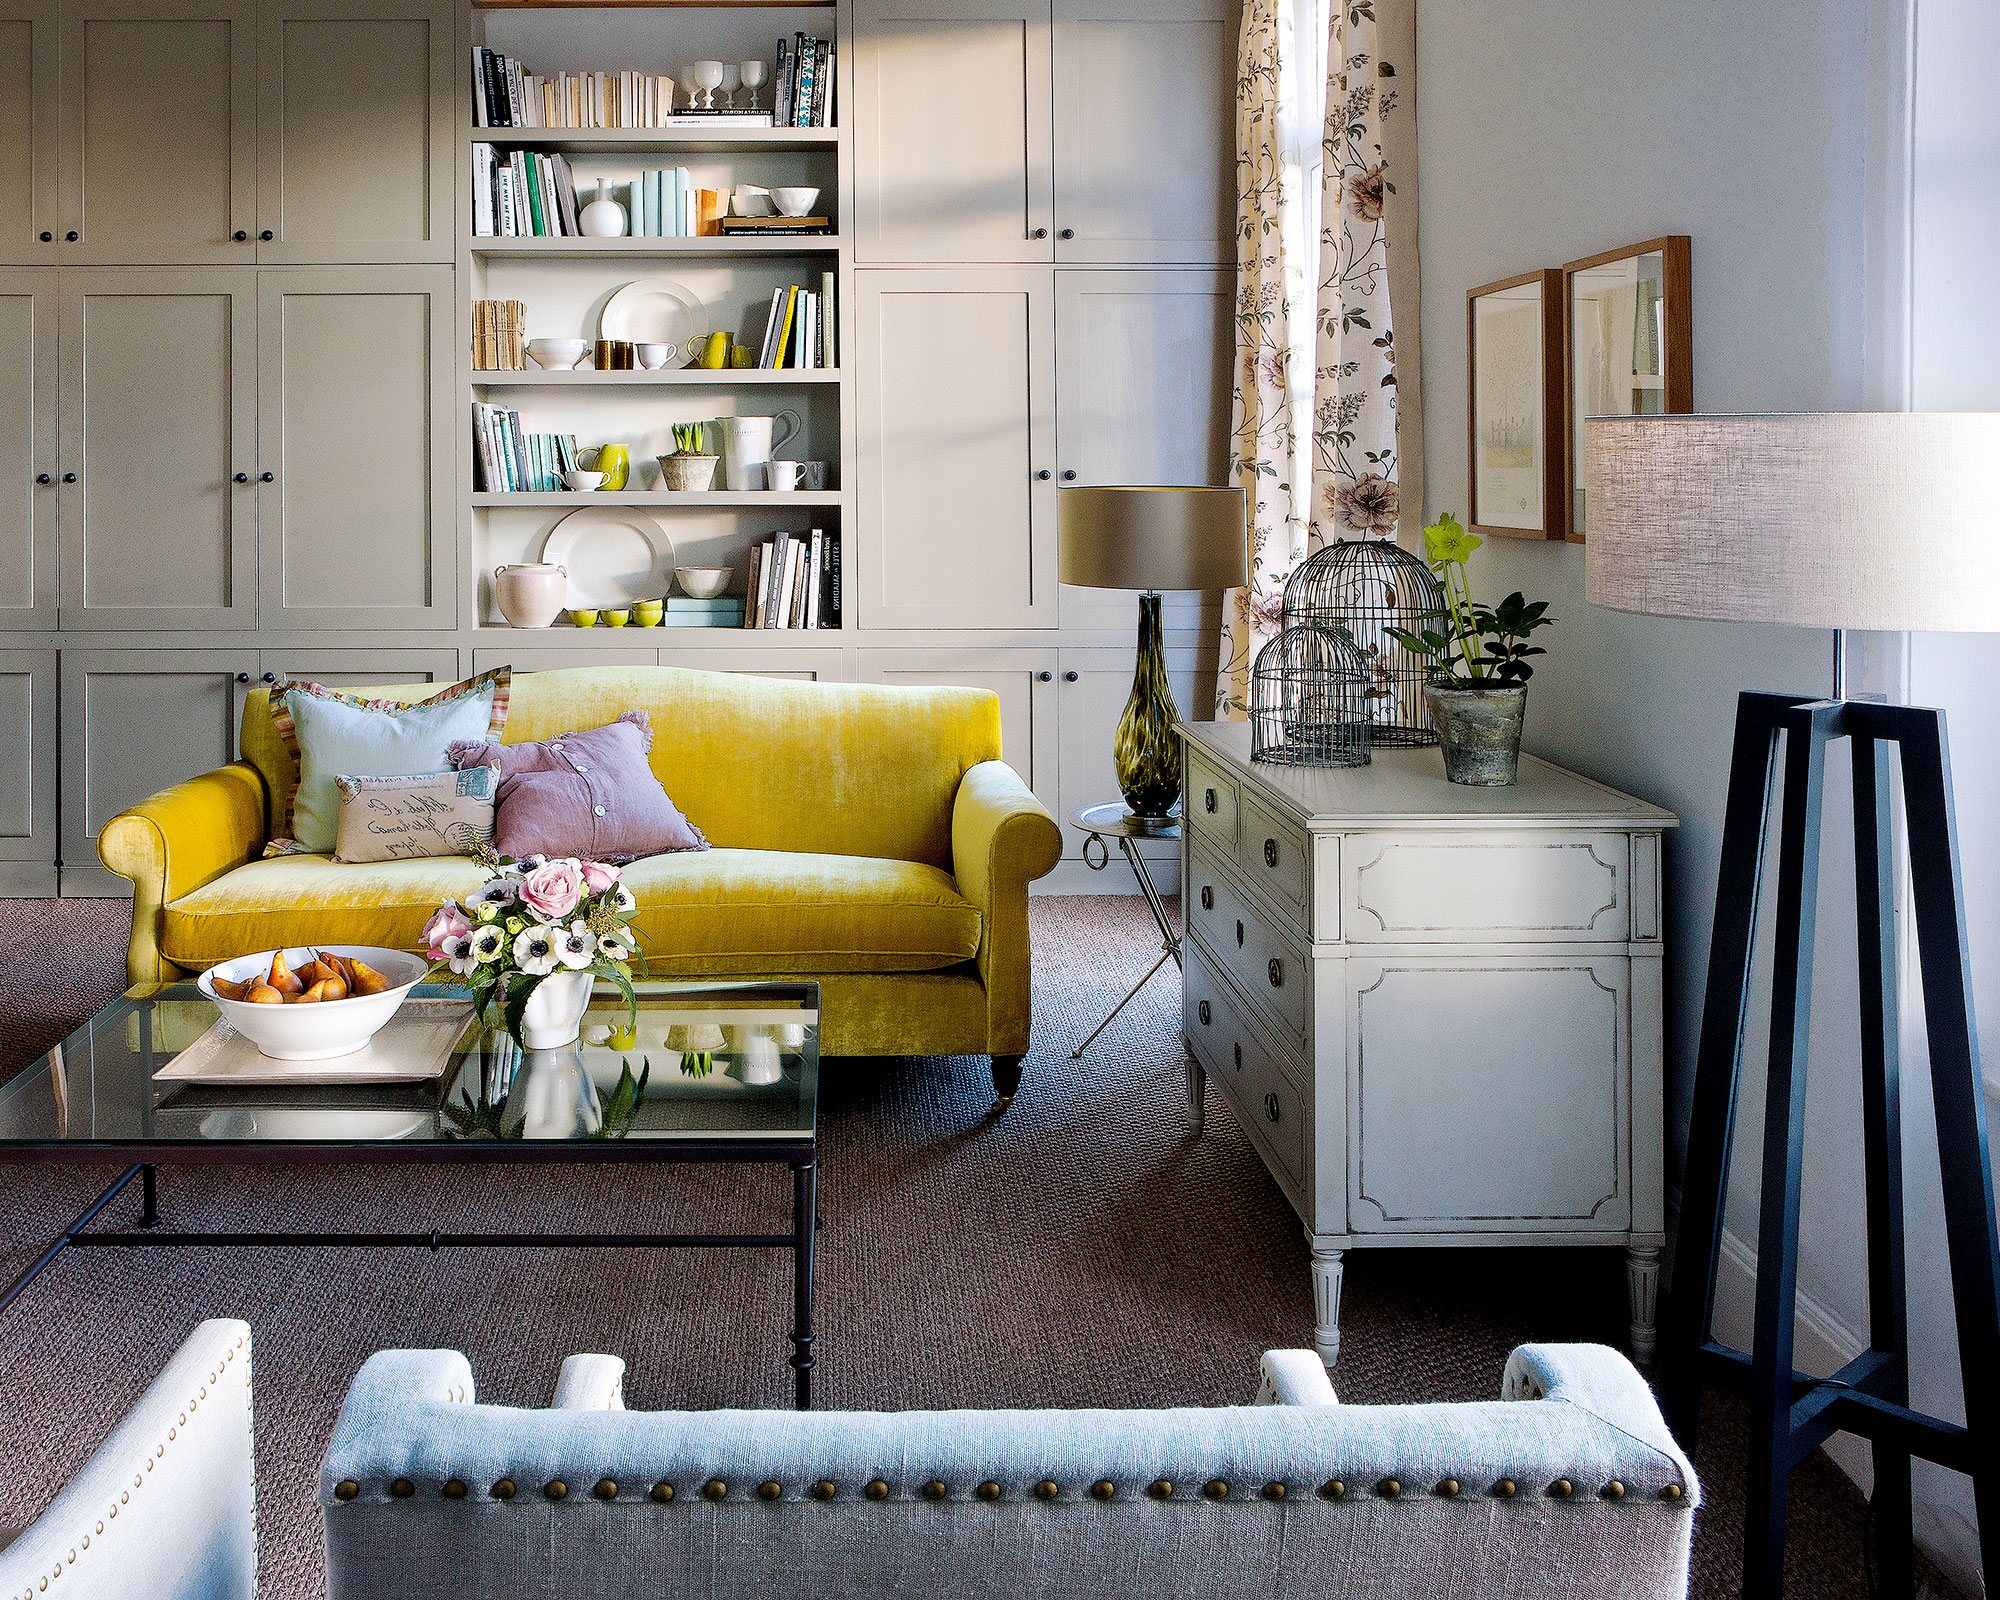 Living room ideas with yellow sofa